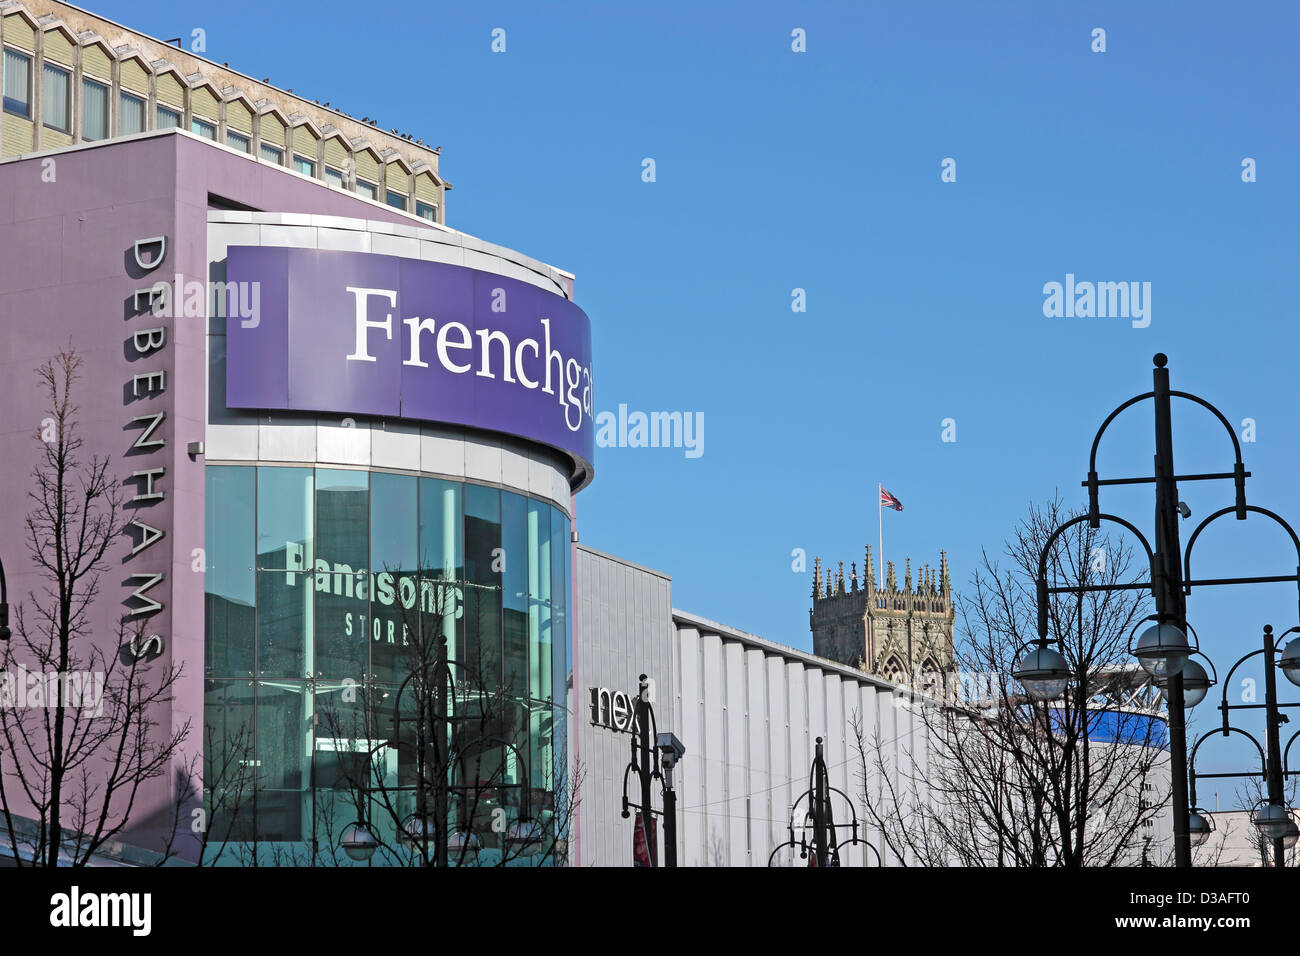 Doncaster Frenchgate Shopping Centre with St George's Church / Doncaster Minster in the background Stock Photo